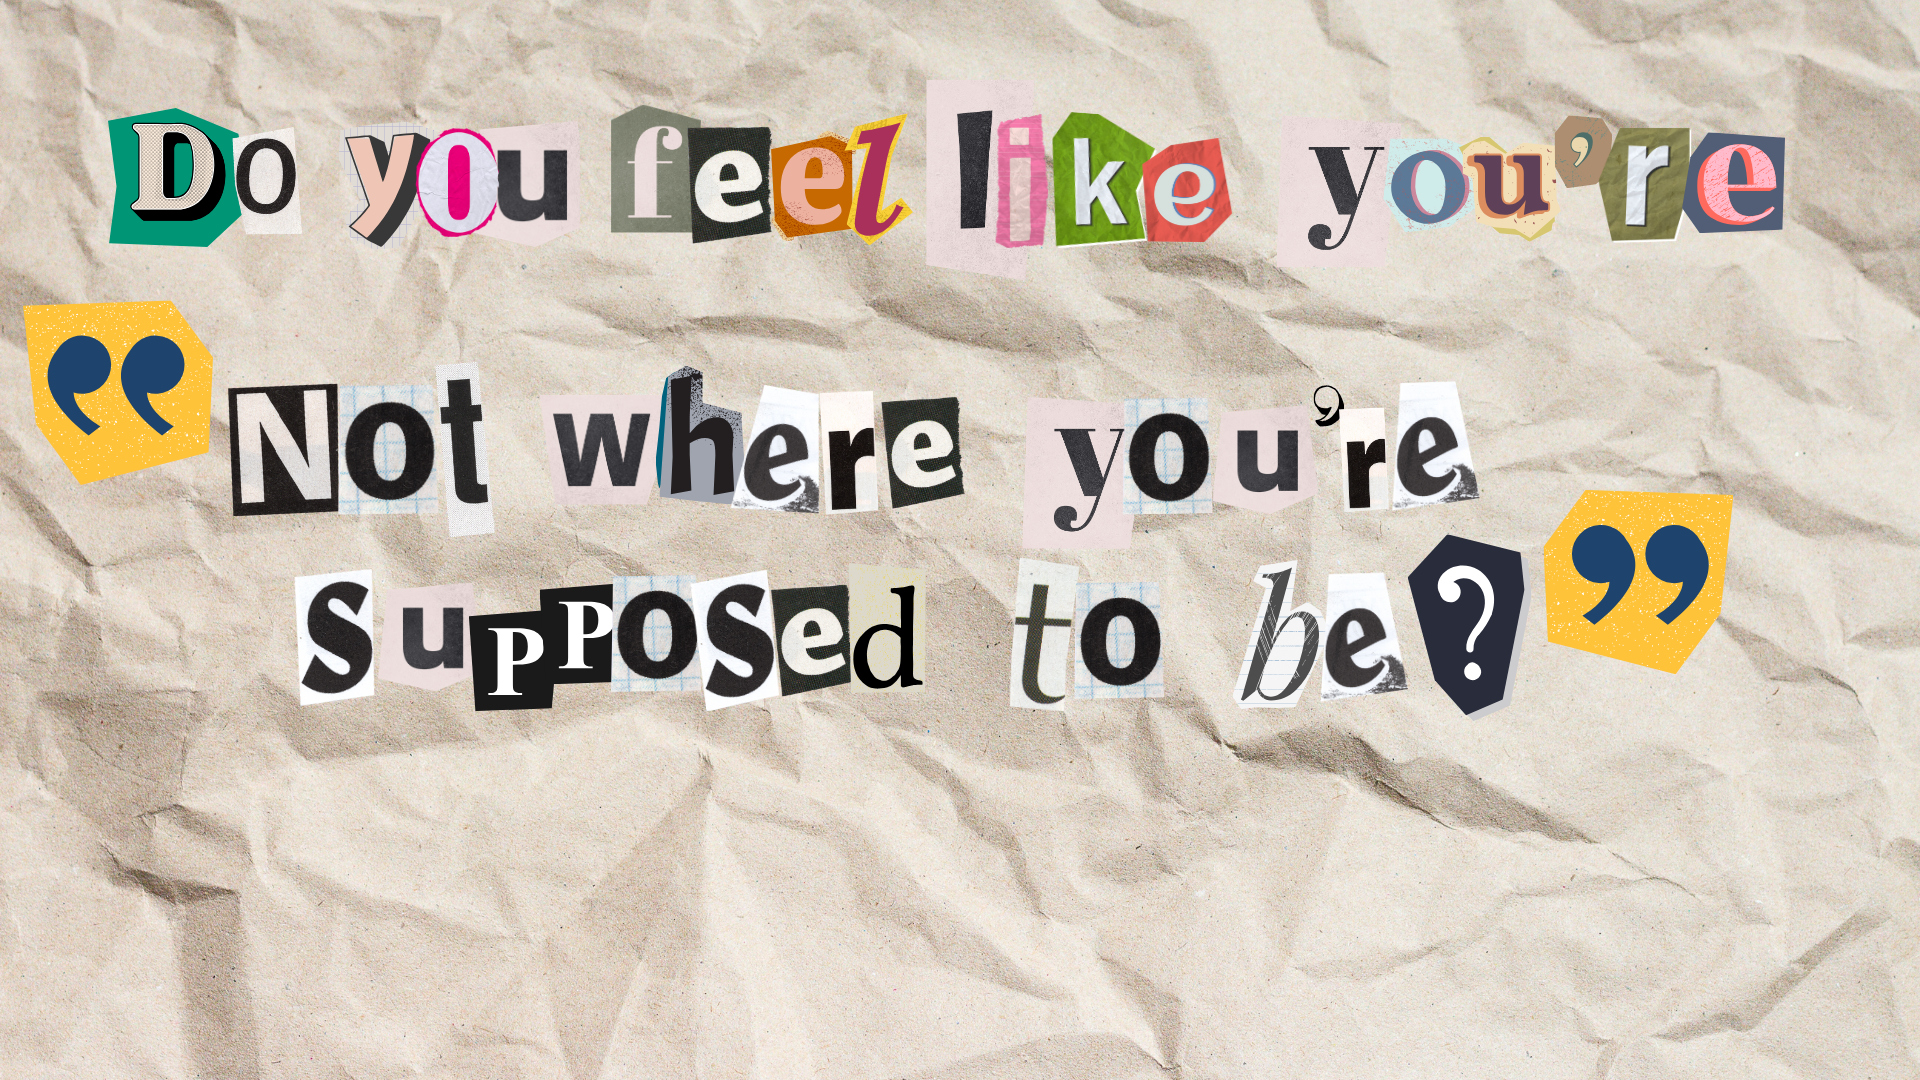 Cutout letters on crinkled paper form the question &quot;Do you feel like you&#x27;re not where you&#x27;re supposed to be?&quot;